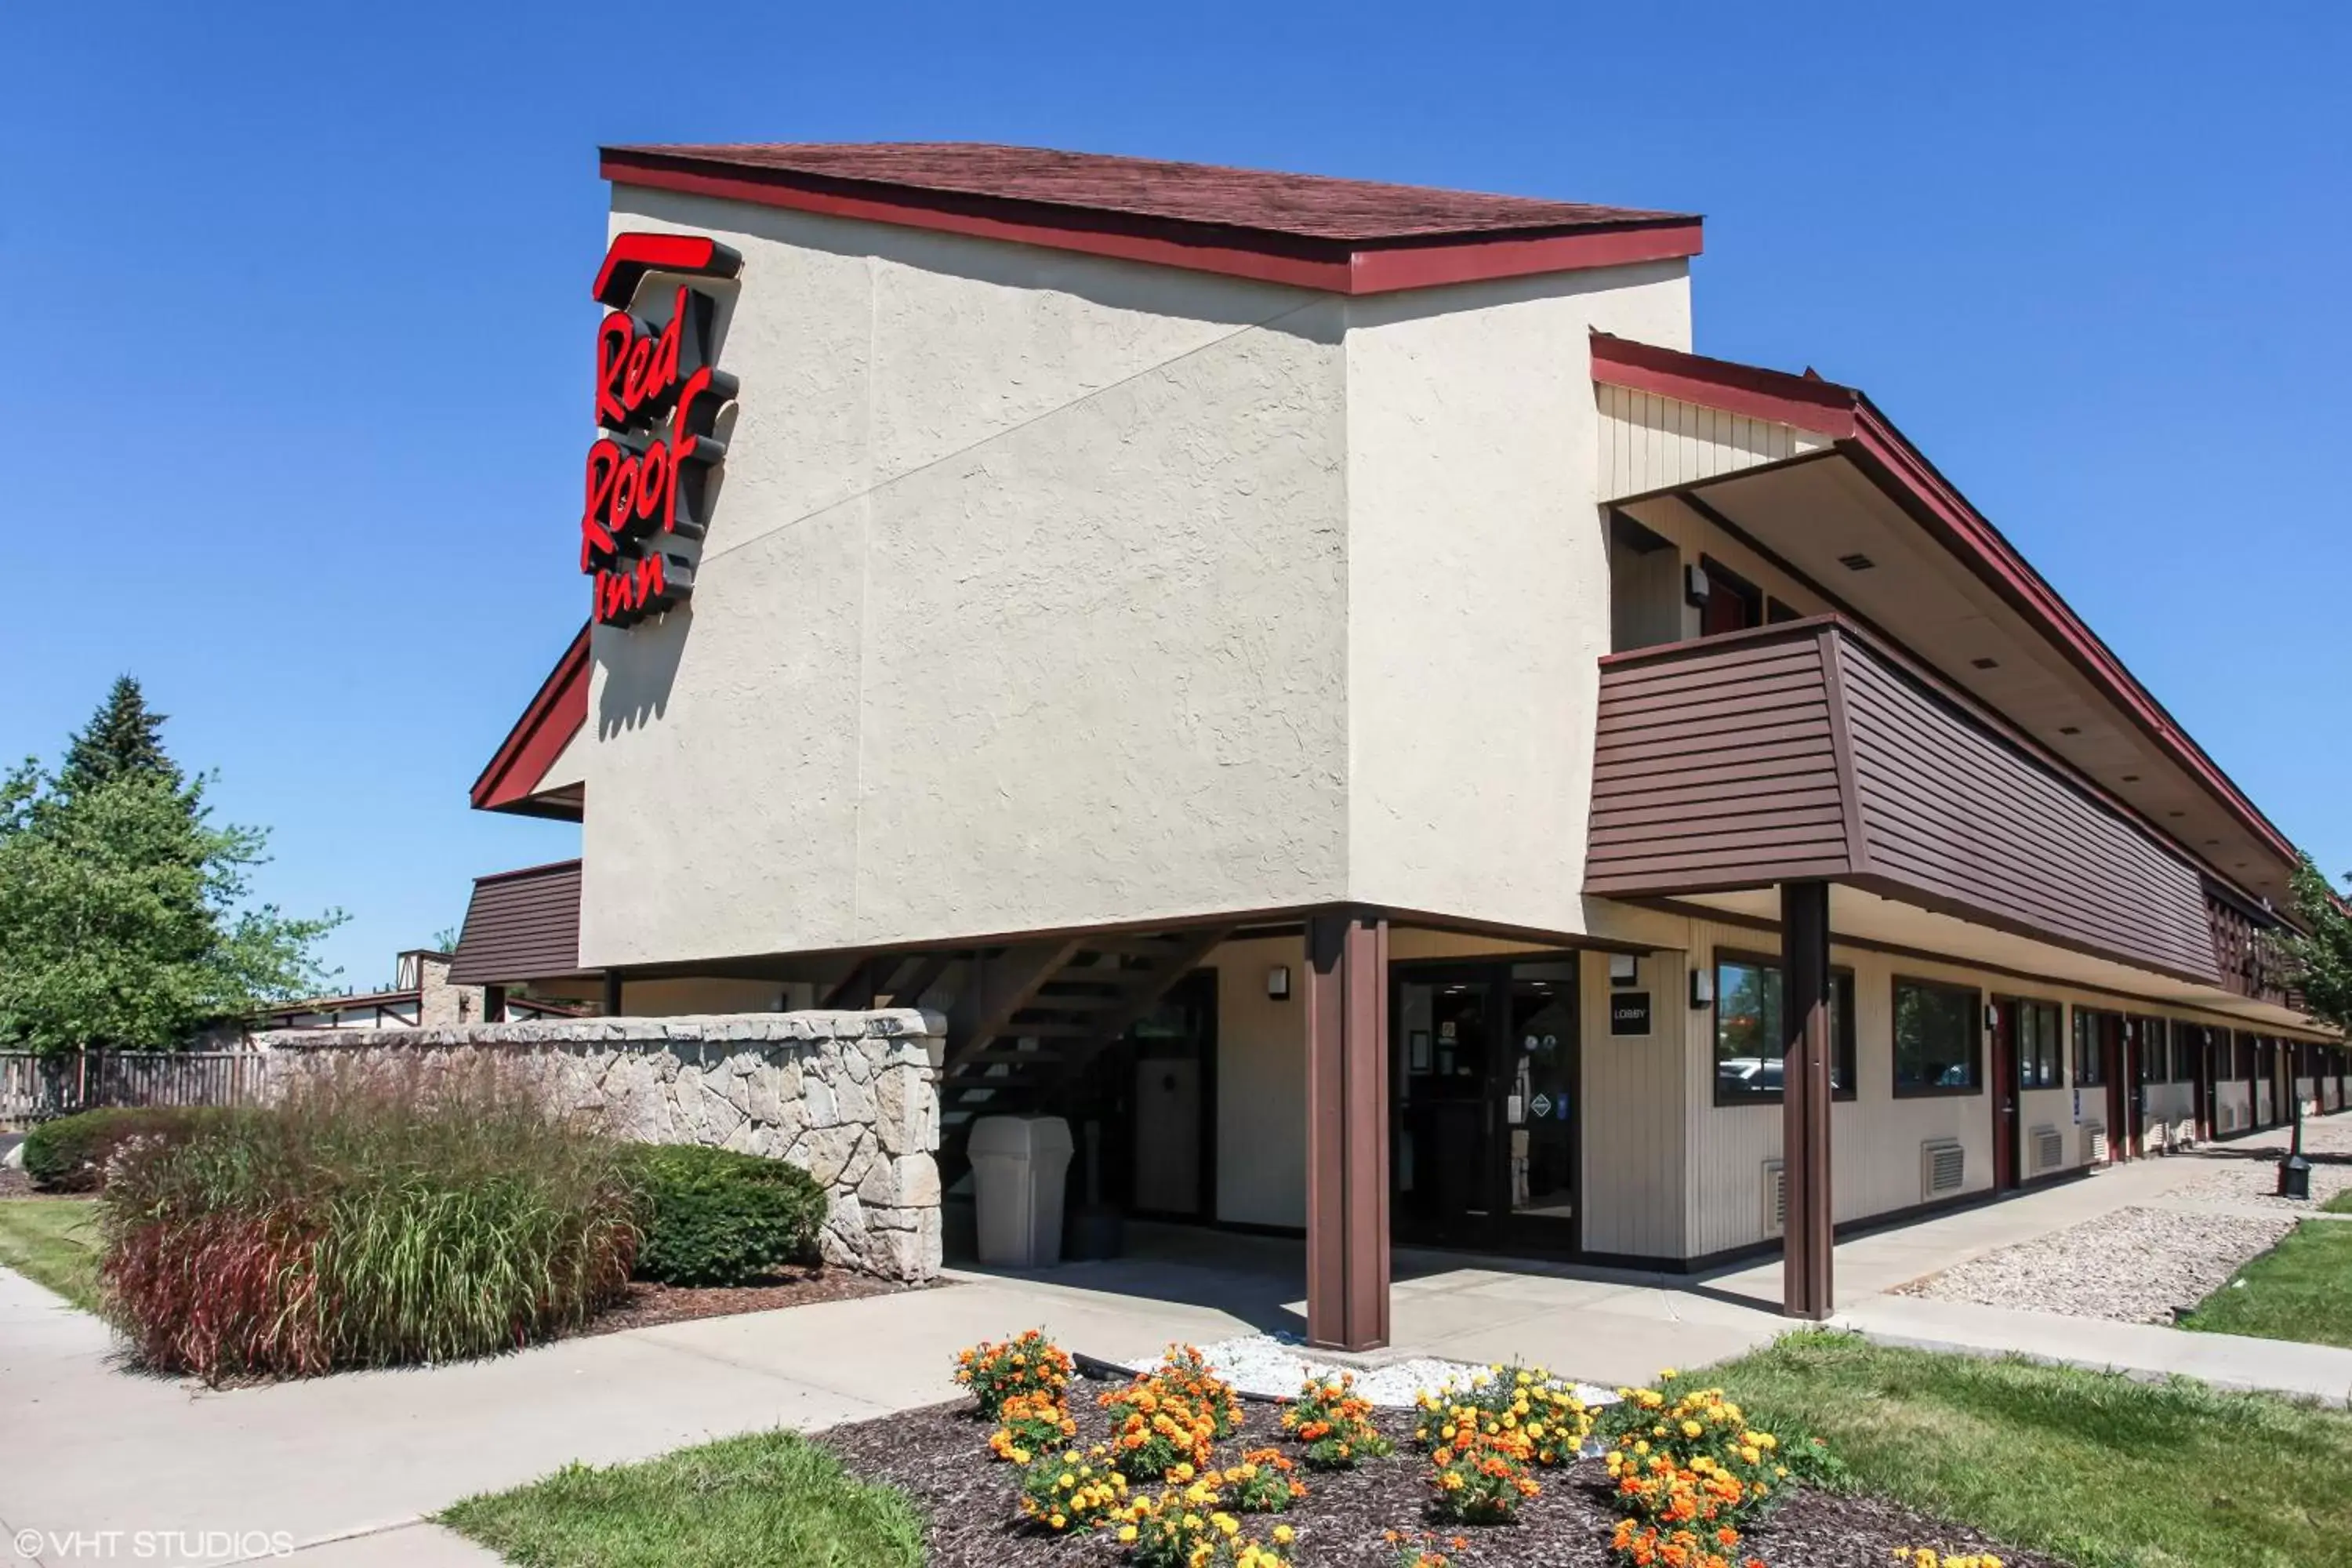 Property Building in Red Roof Inn Michigan City